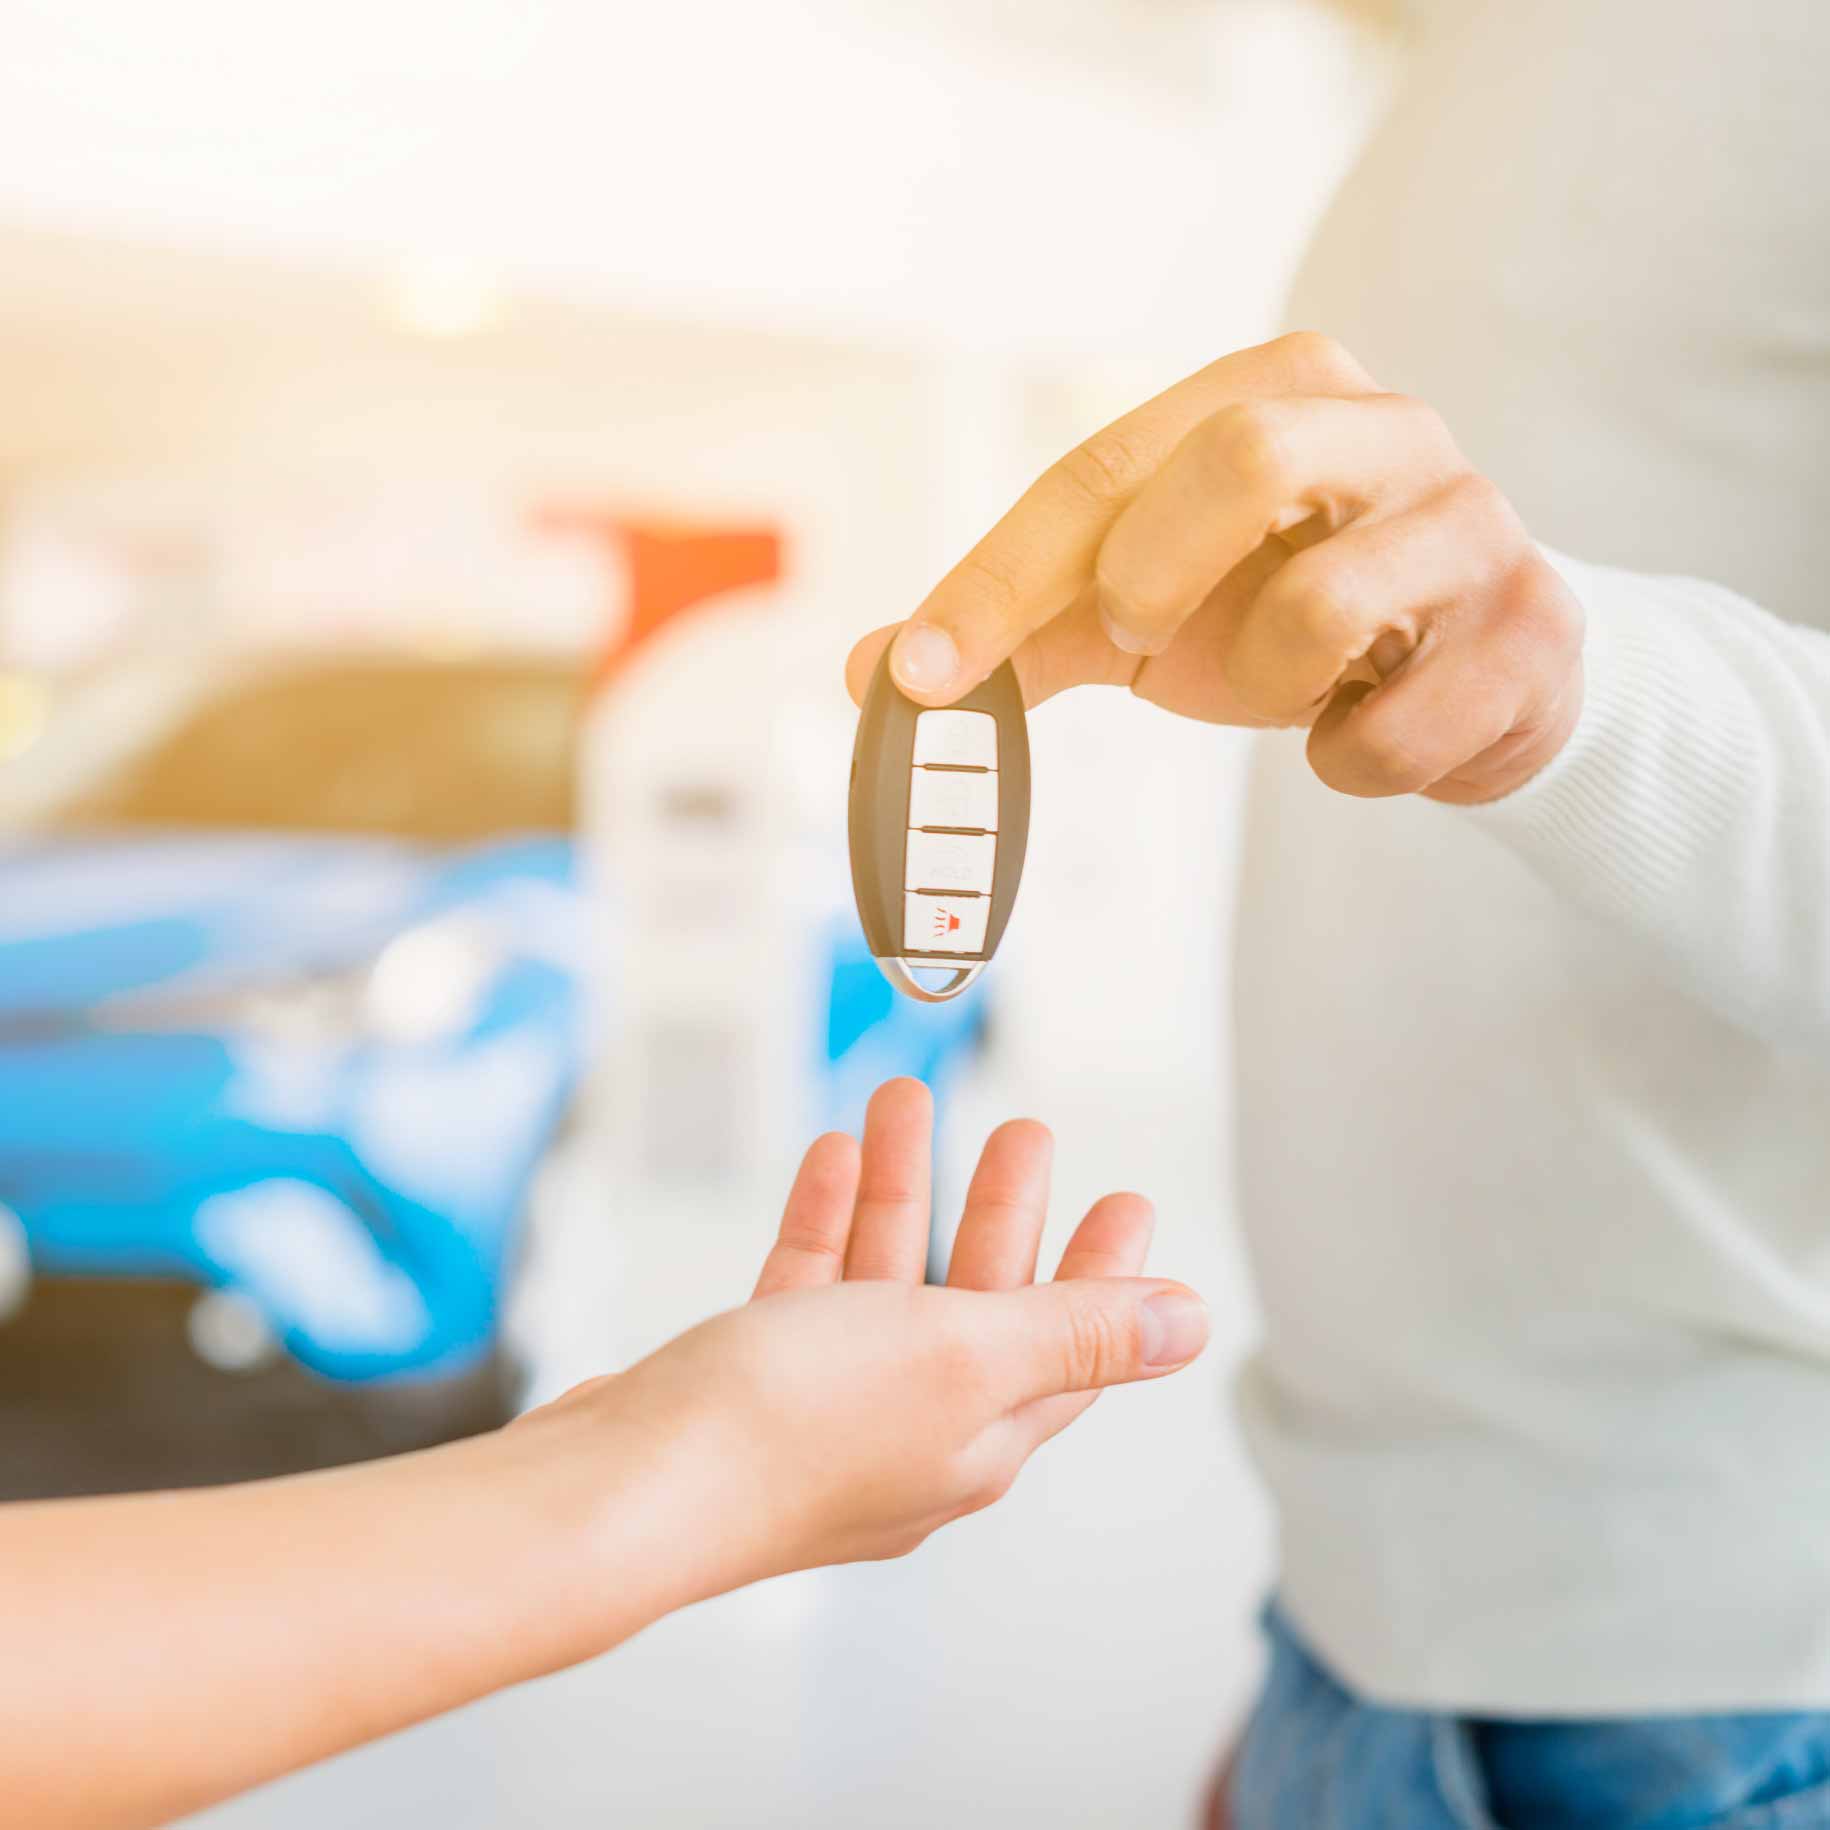 Do You Want to Trade in Your Car? Understand First the Benefits and the Risks